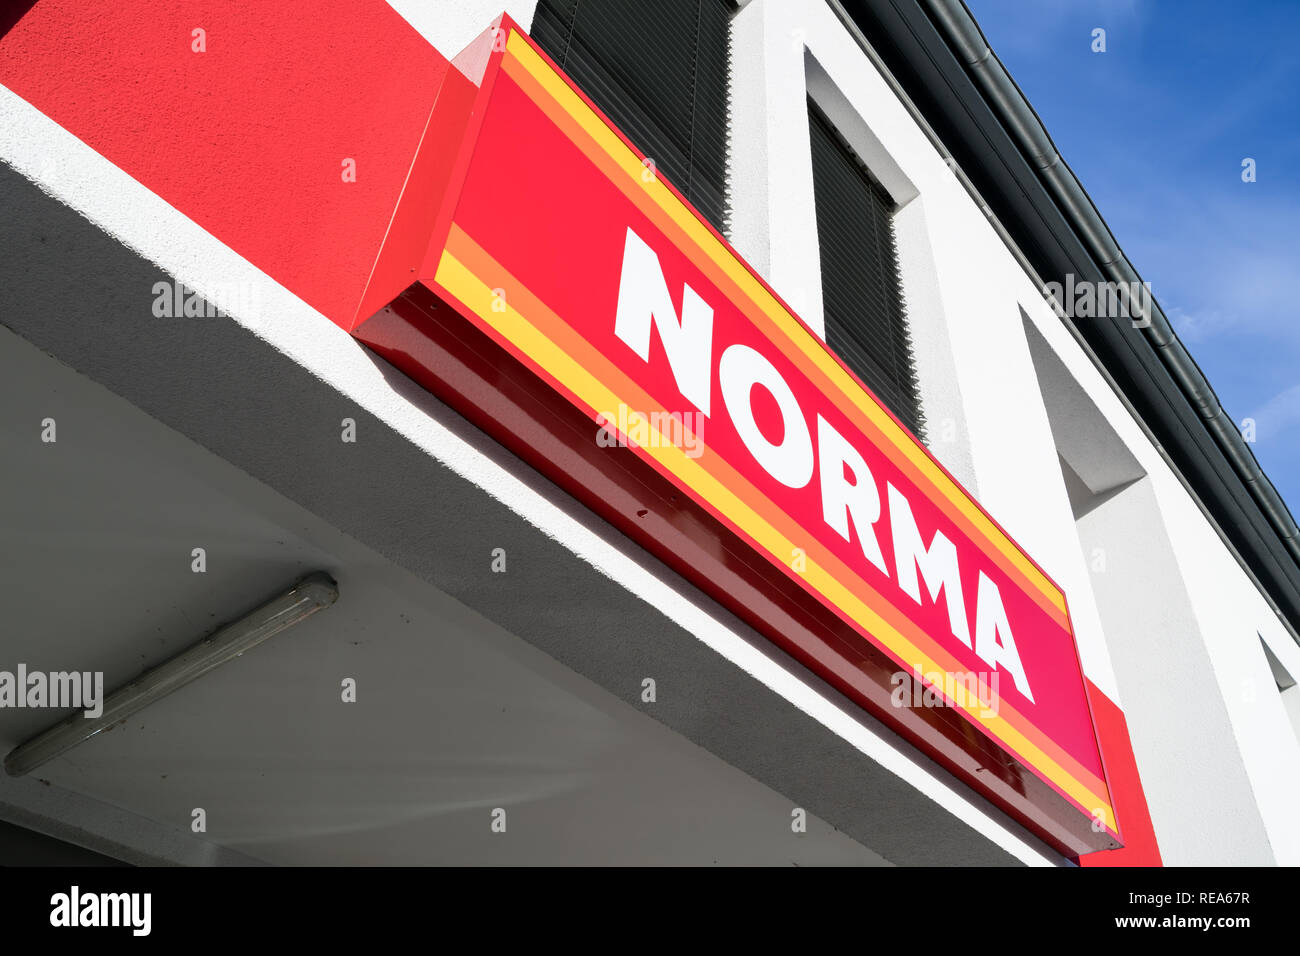 Norma sign at branch. Norma is a food discount store with more than 1,300 stores in Germany, Austria, France and the Czech Republic. Stock Photo